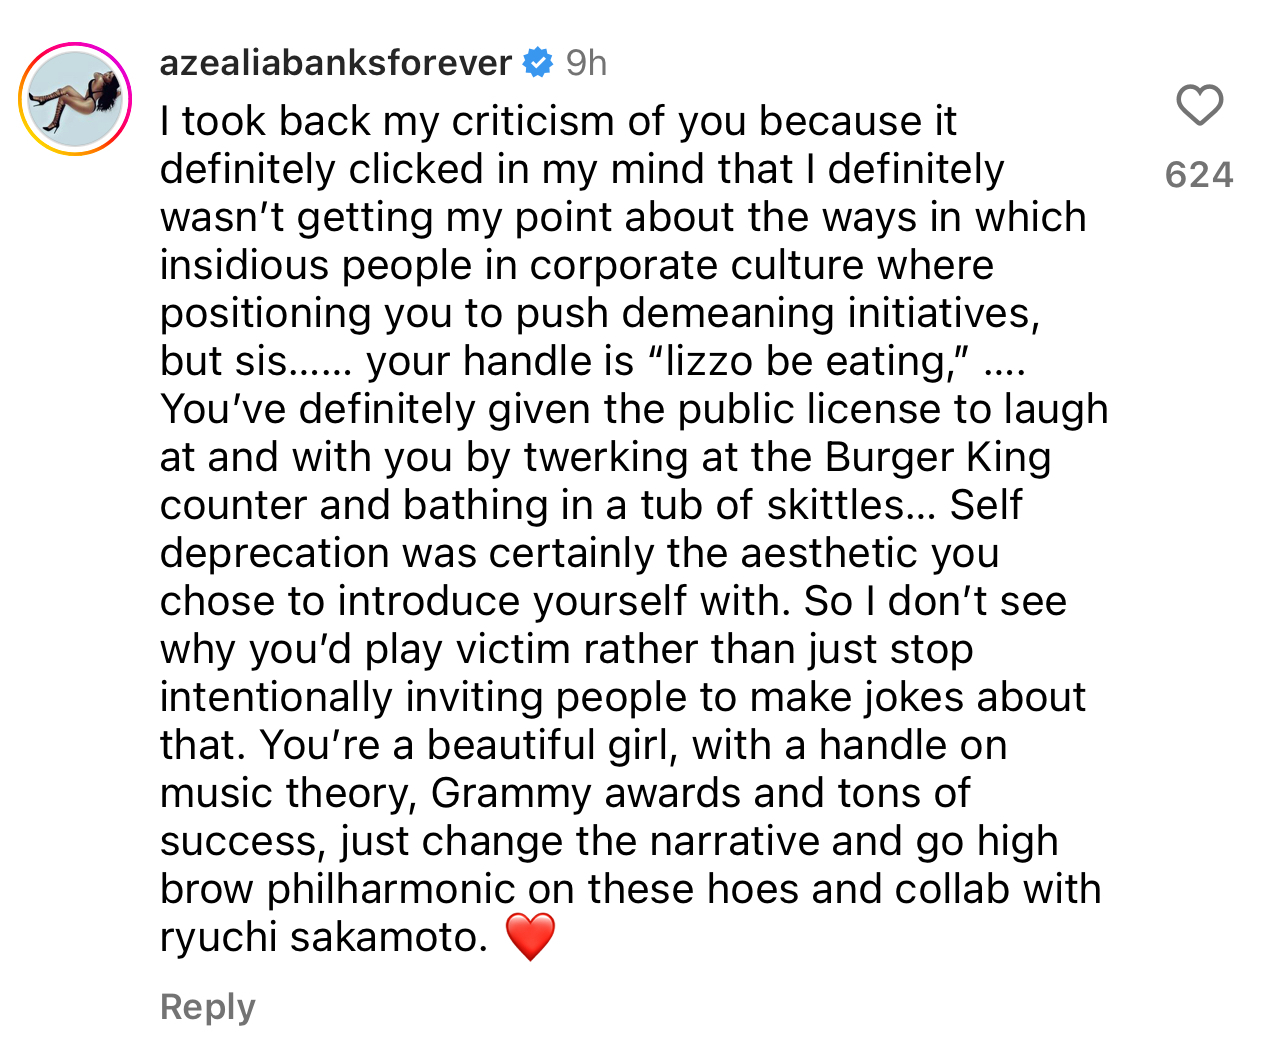 Azealia Banks posts an Instagram comment discussing her previous criticism of another individual and reflects on public personas and industry pressures